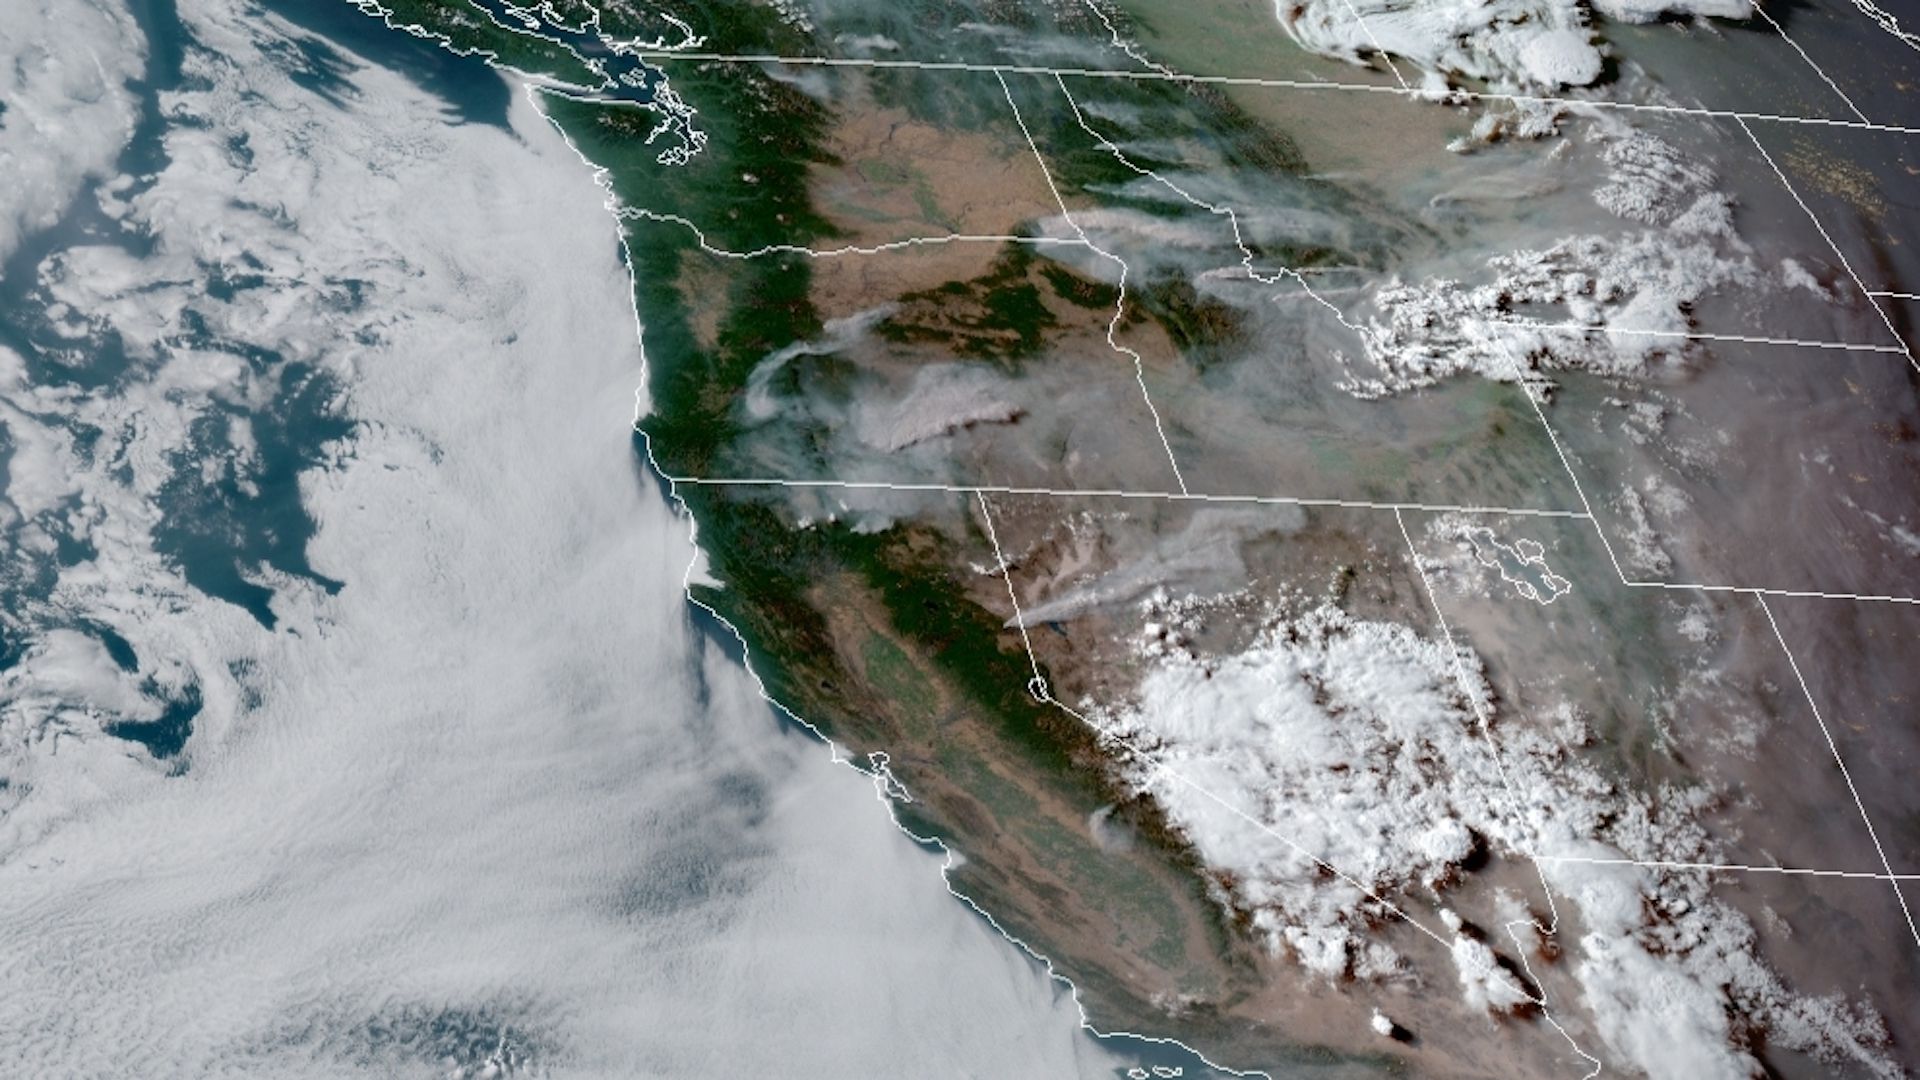 Satellite image showing wildfires erupting across the West, with smoke plumes visible.